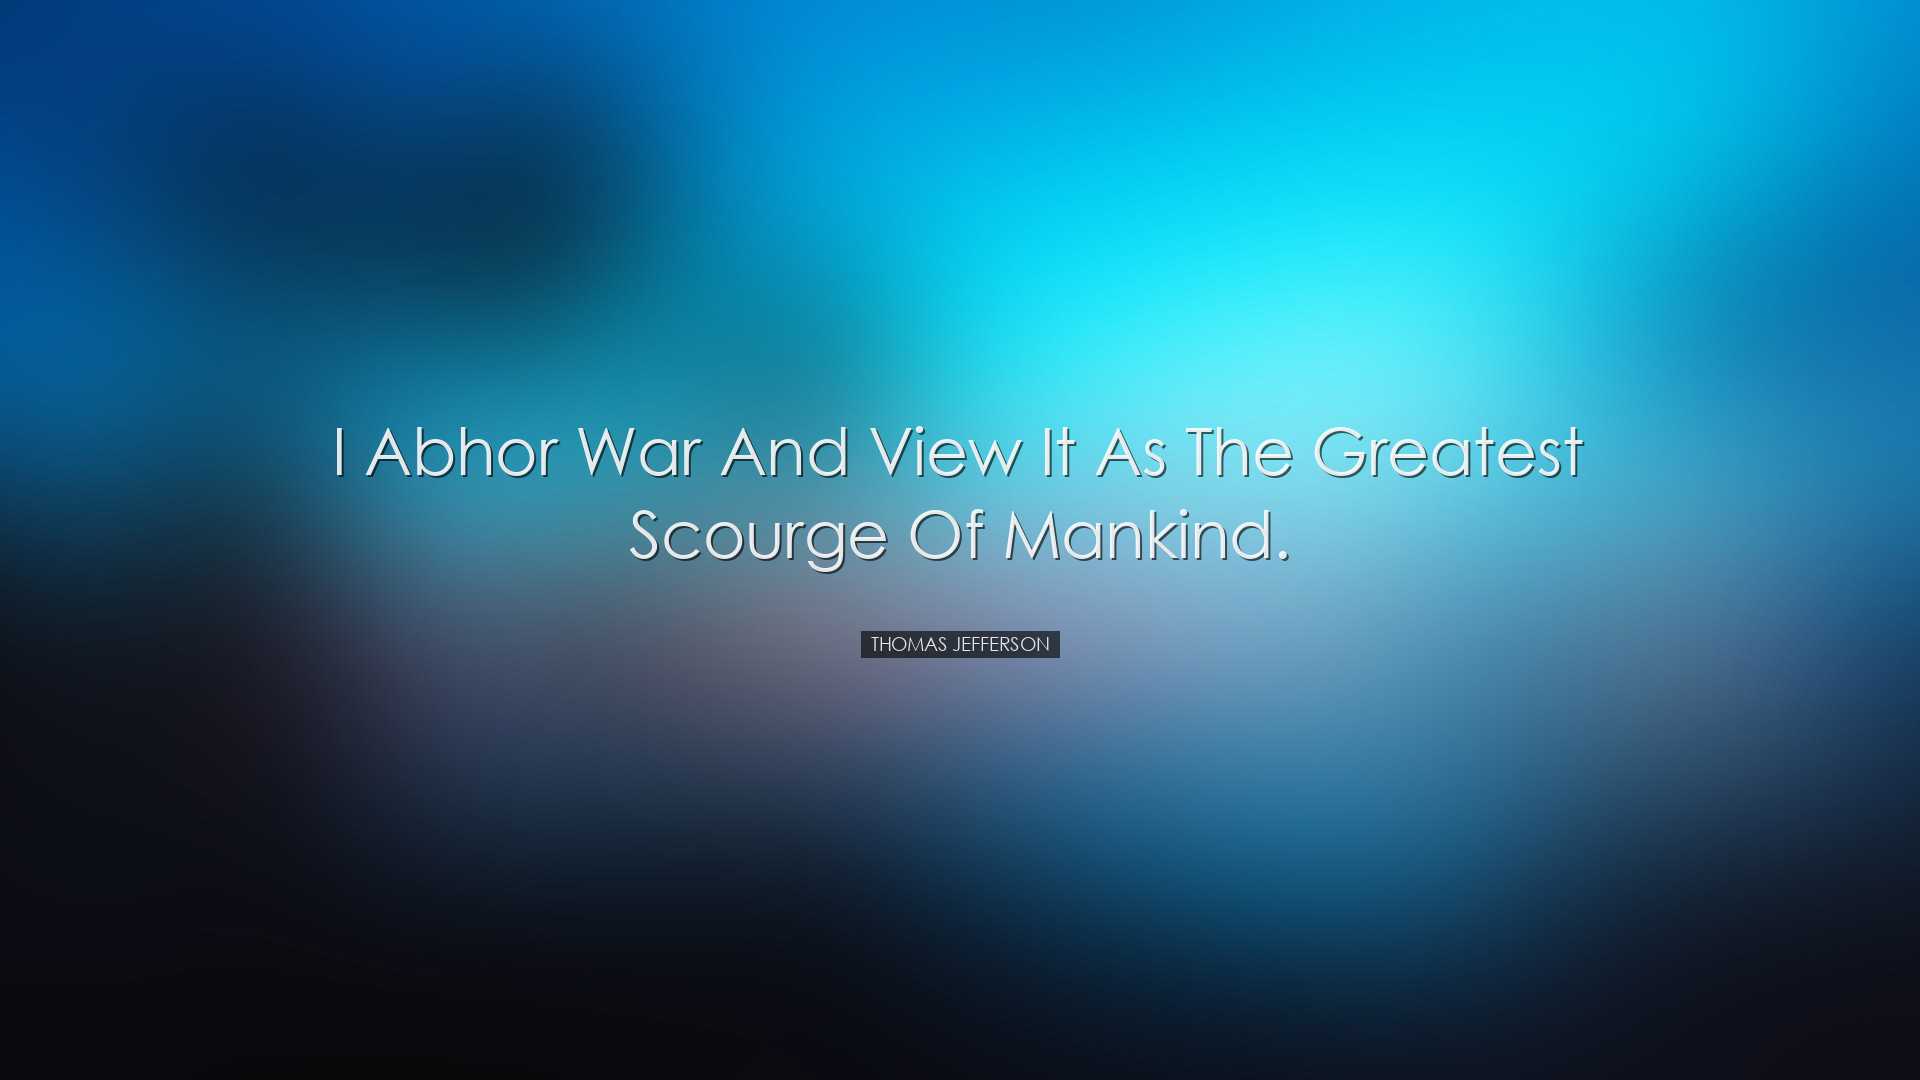 I abhor war and view it as the greatest scourge of mankind. - Thom